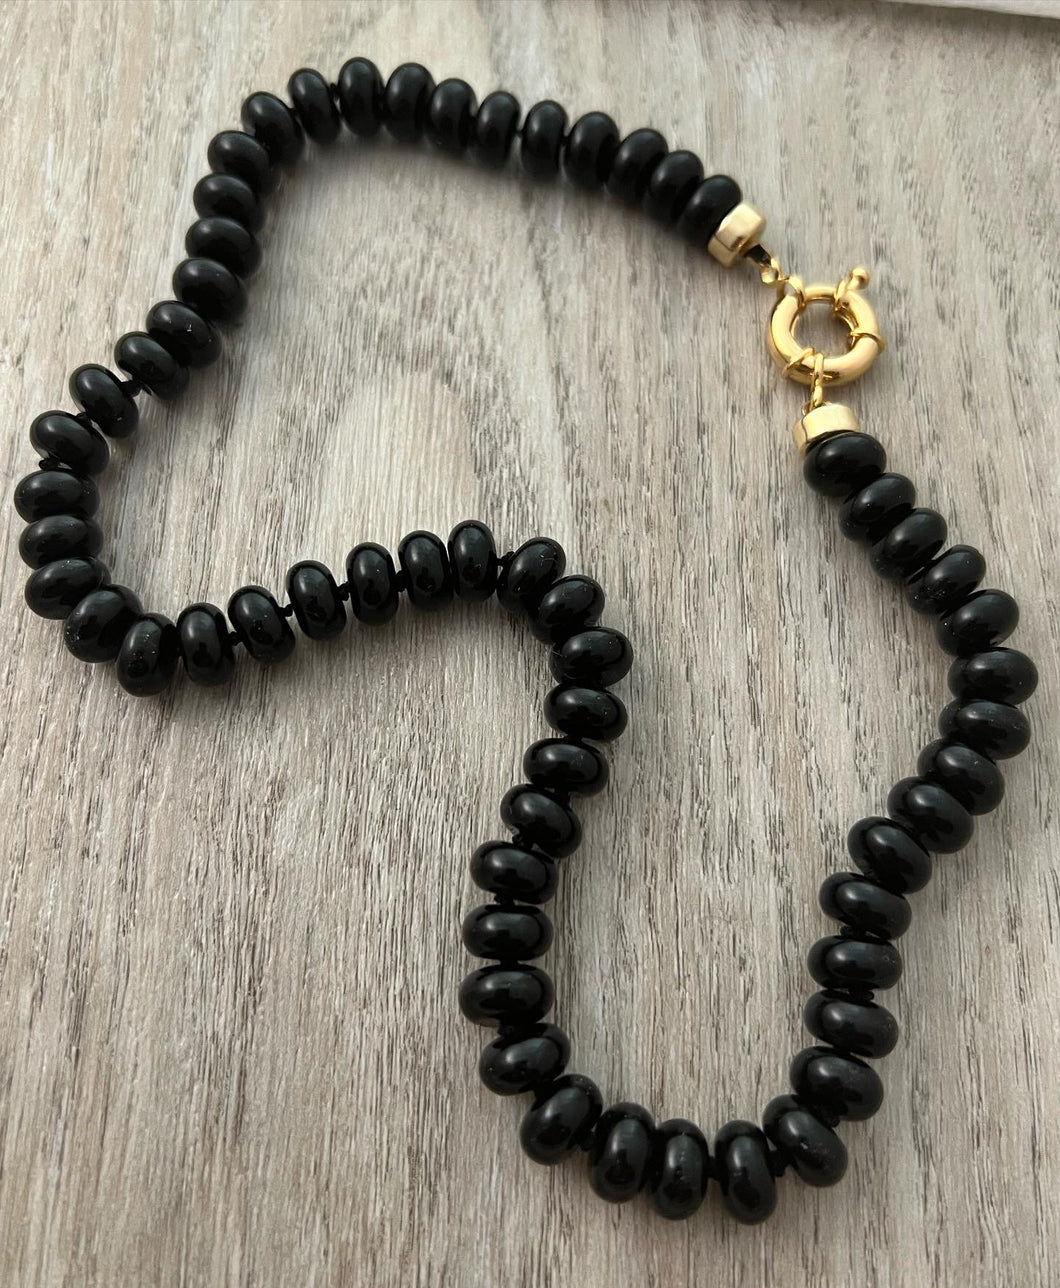 Gorgeous black onyx 9mm gemstones hand knotted on black silk thread with gold filled end caps and a gold filled sailors clasp make up this 18 inch stunner that will be your go to neutral for any season